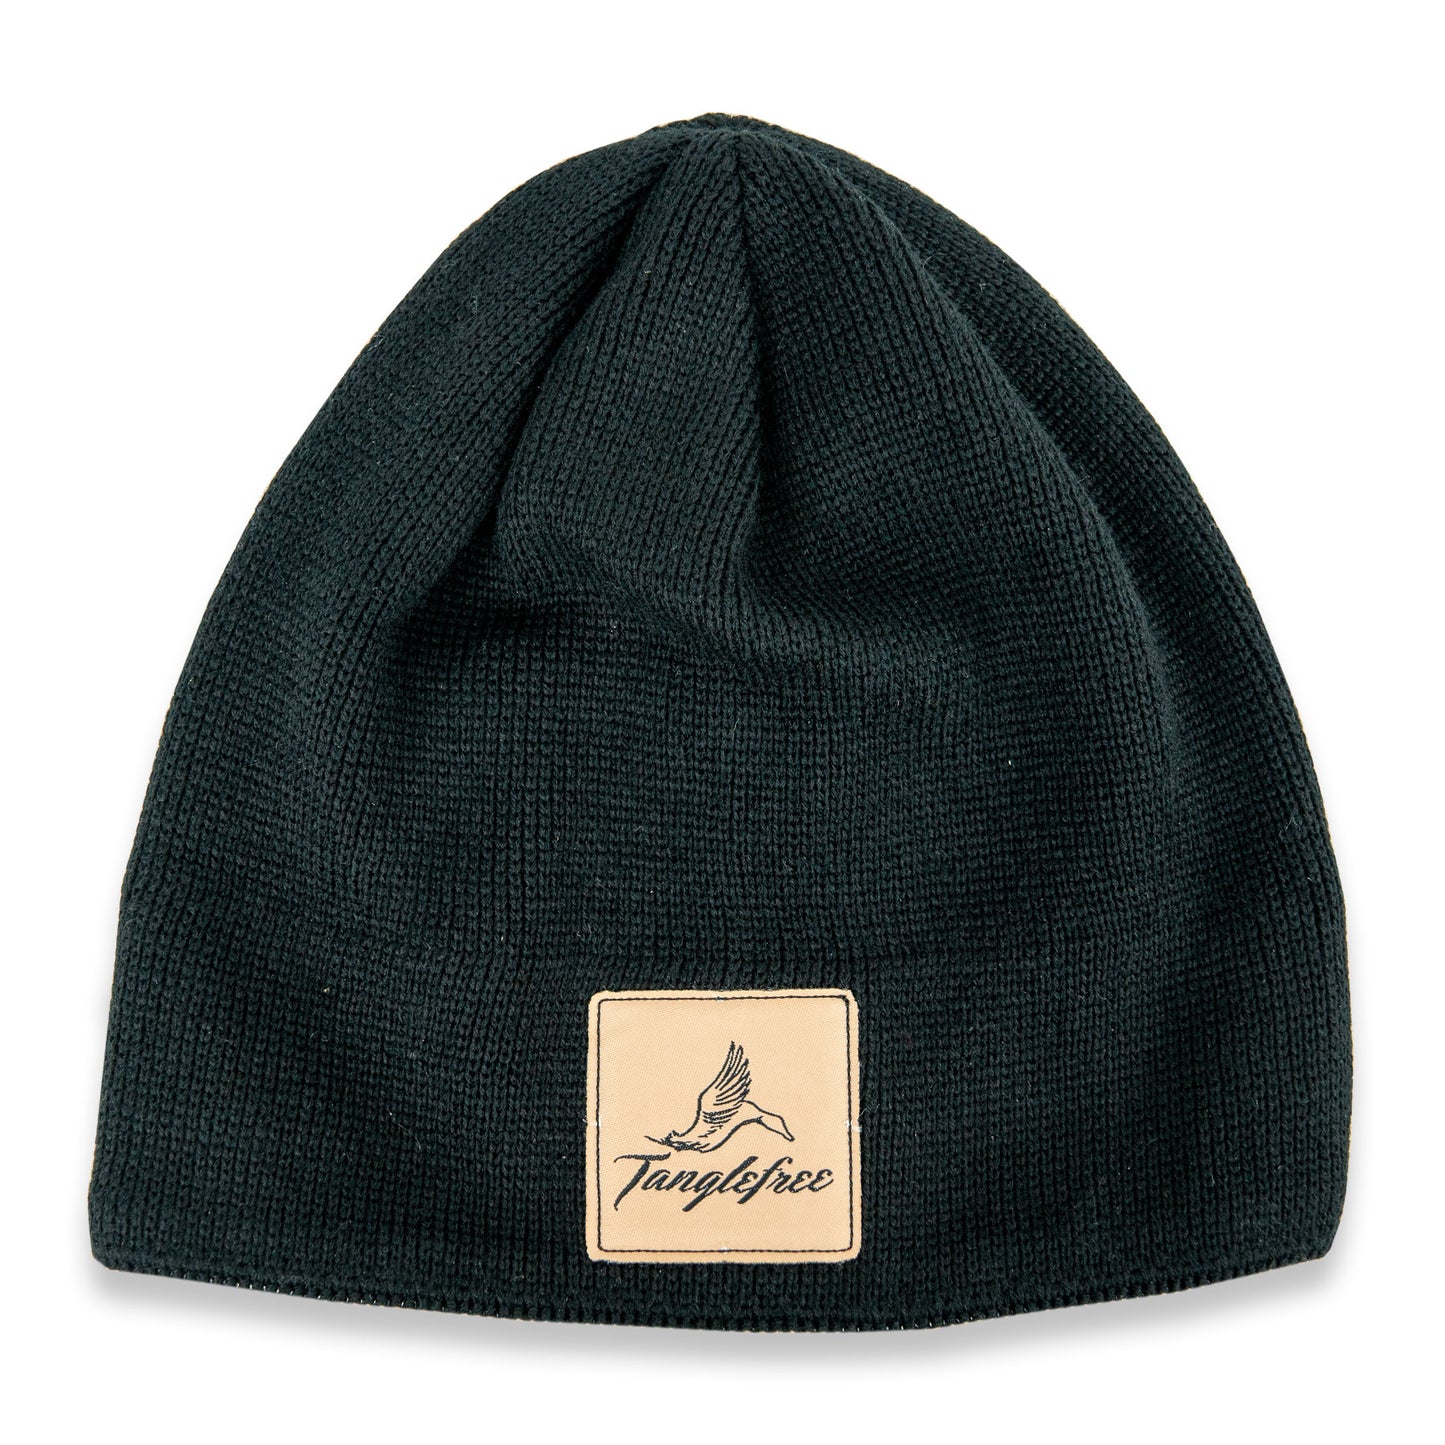 Tanglefree Black Beanie Square Patch